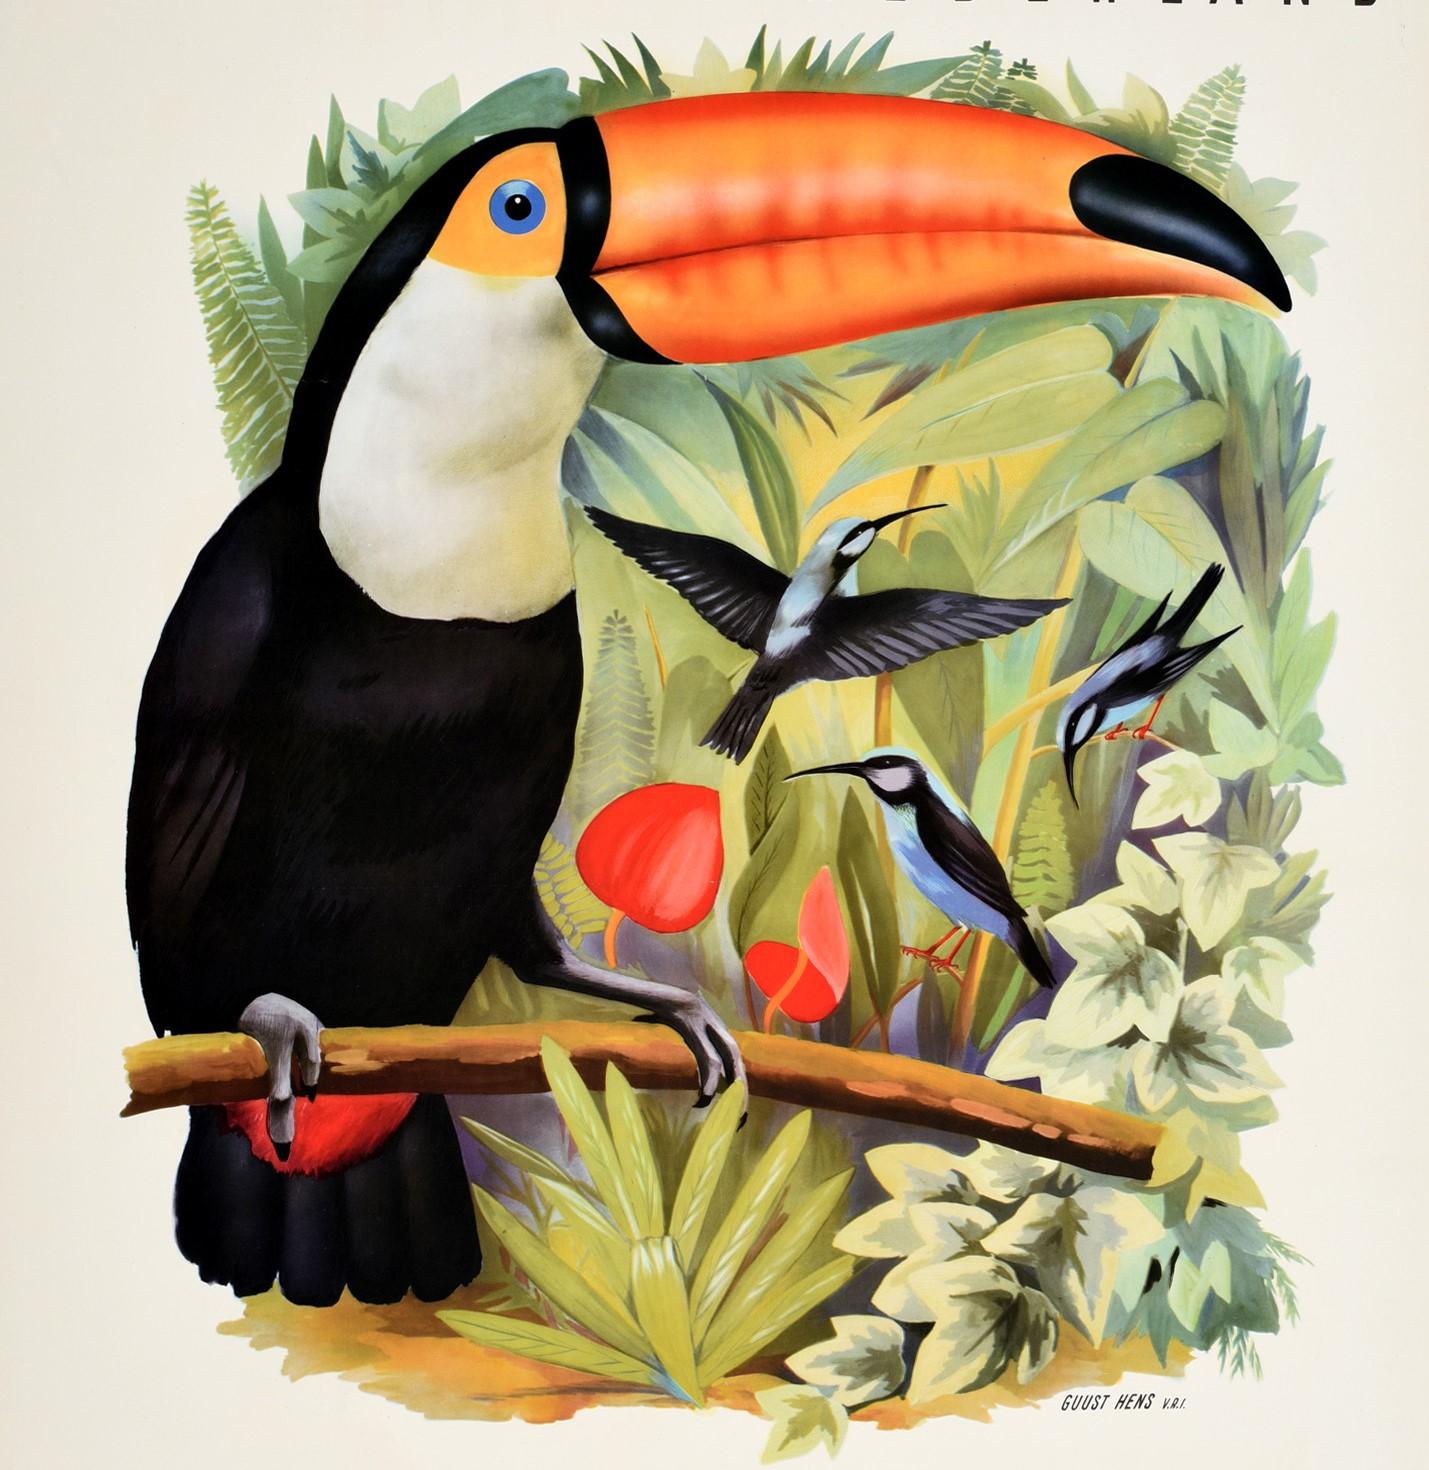 Original vintage travel poster advertising The Pride of the Netherlands Avifauna Bird Park Alphen on the Rhine / De Trots Van Nederland Avifauna Alphen aan den Rijn featuring a great illustration of a colourful toucan on a tree branch in front of